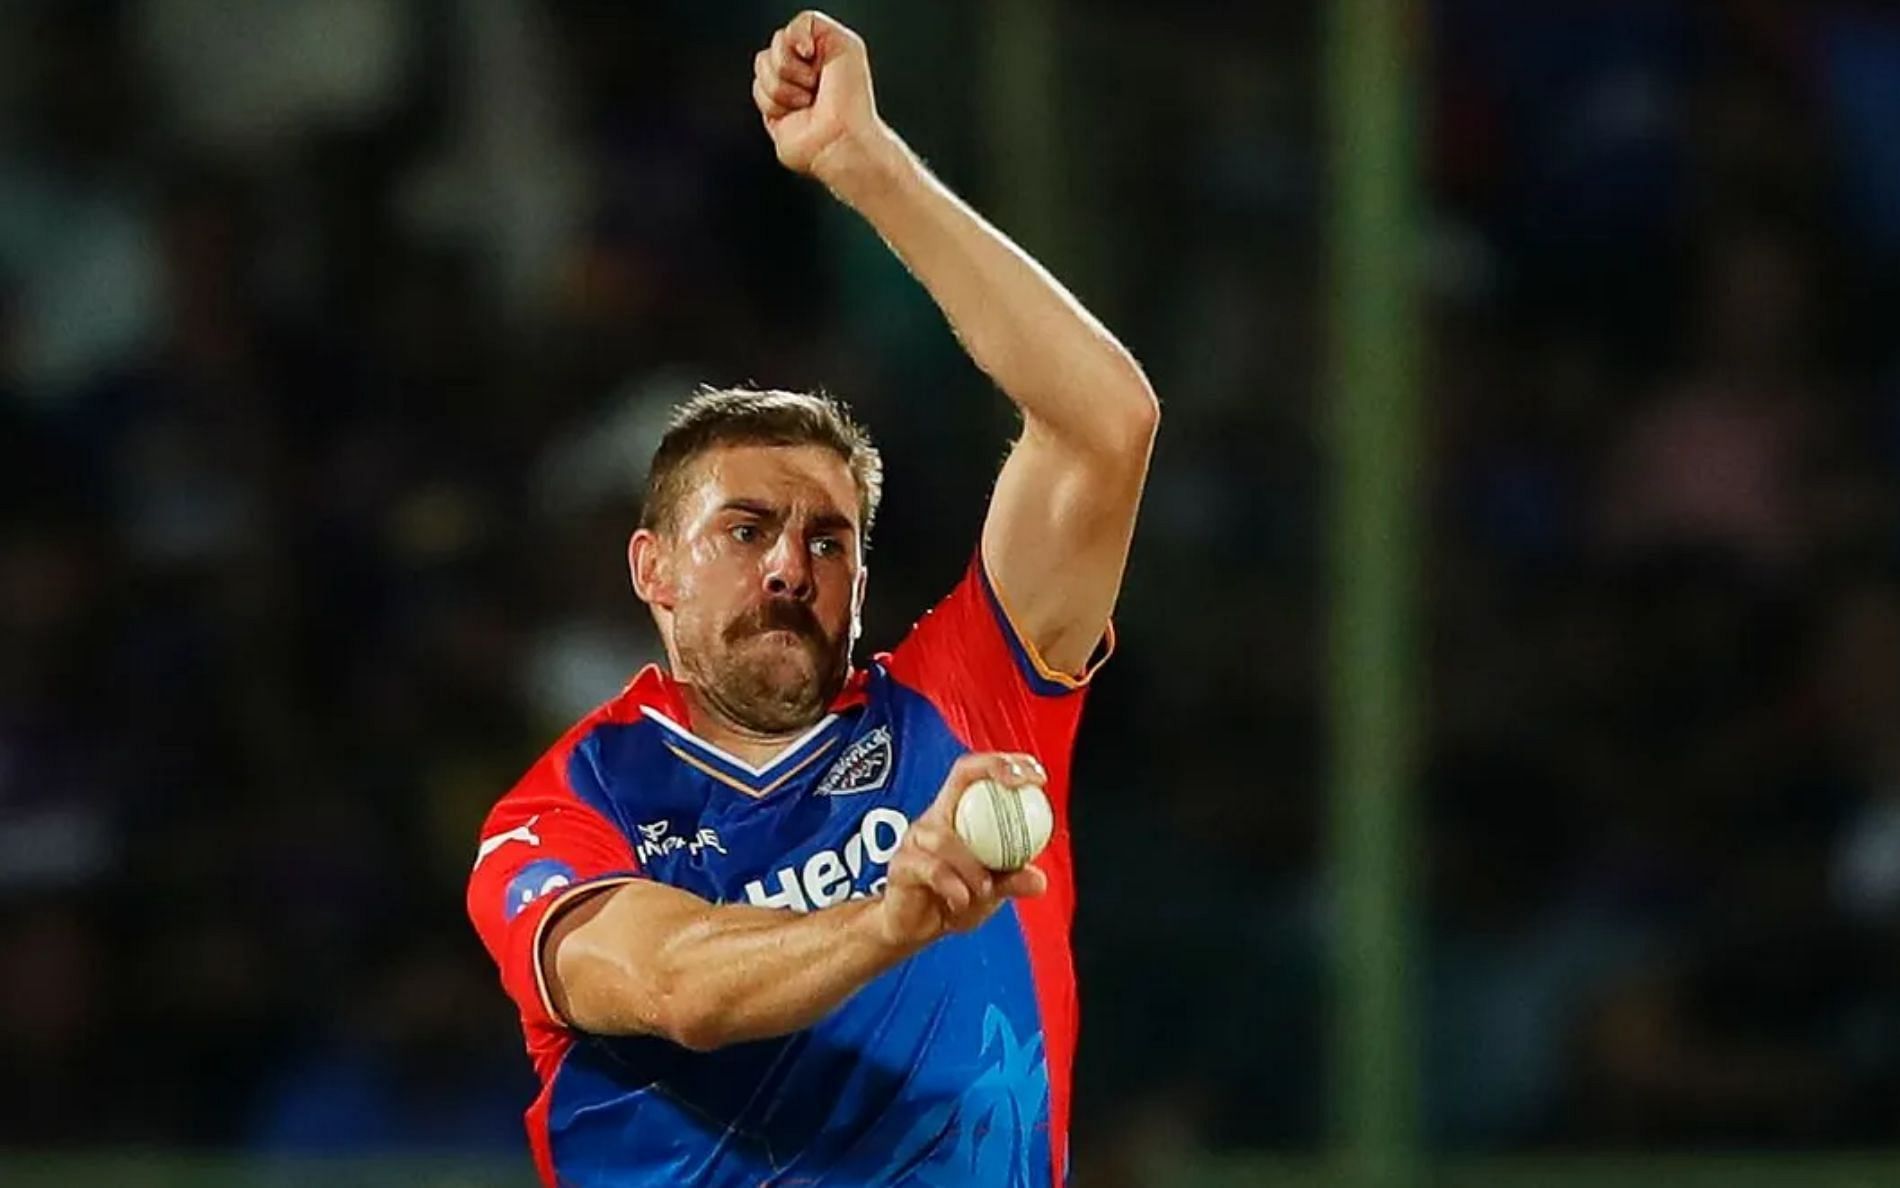 Anrich Nortje has struggled to make an impact. (Pic: BCCI/ iplt20.com)